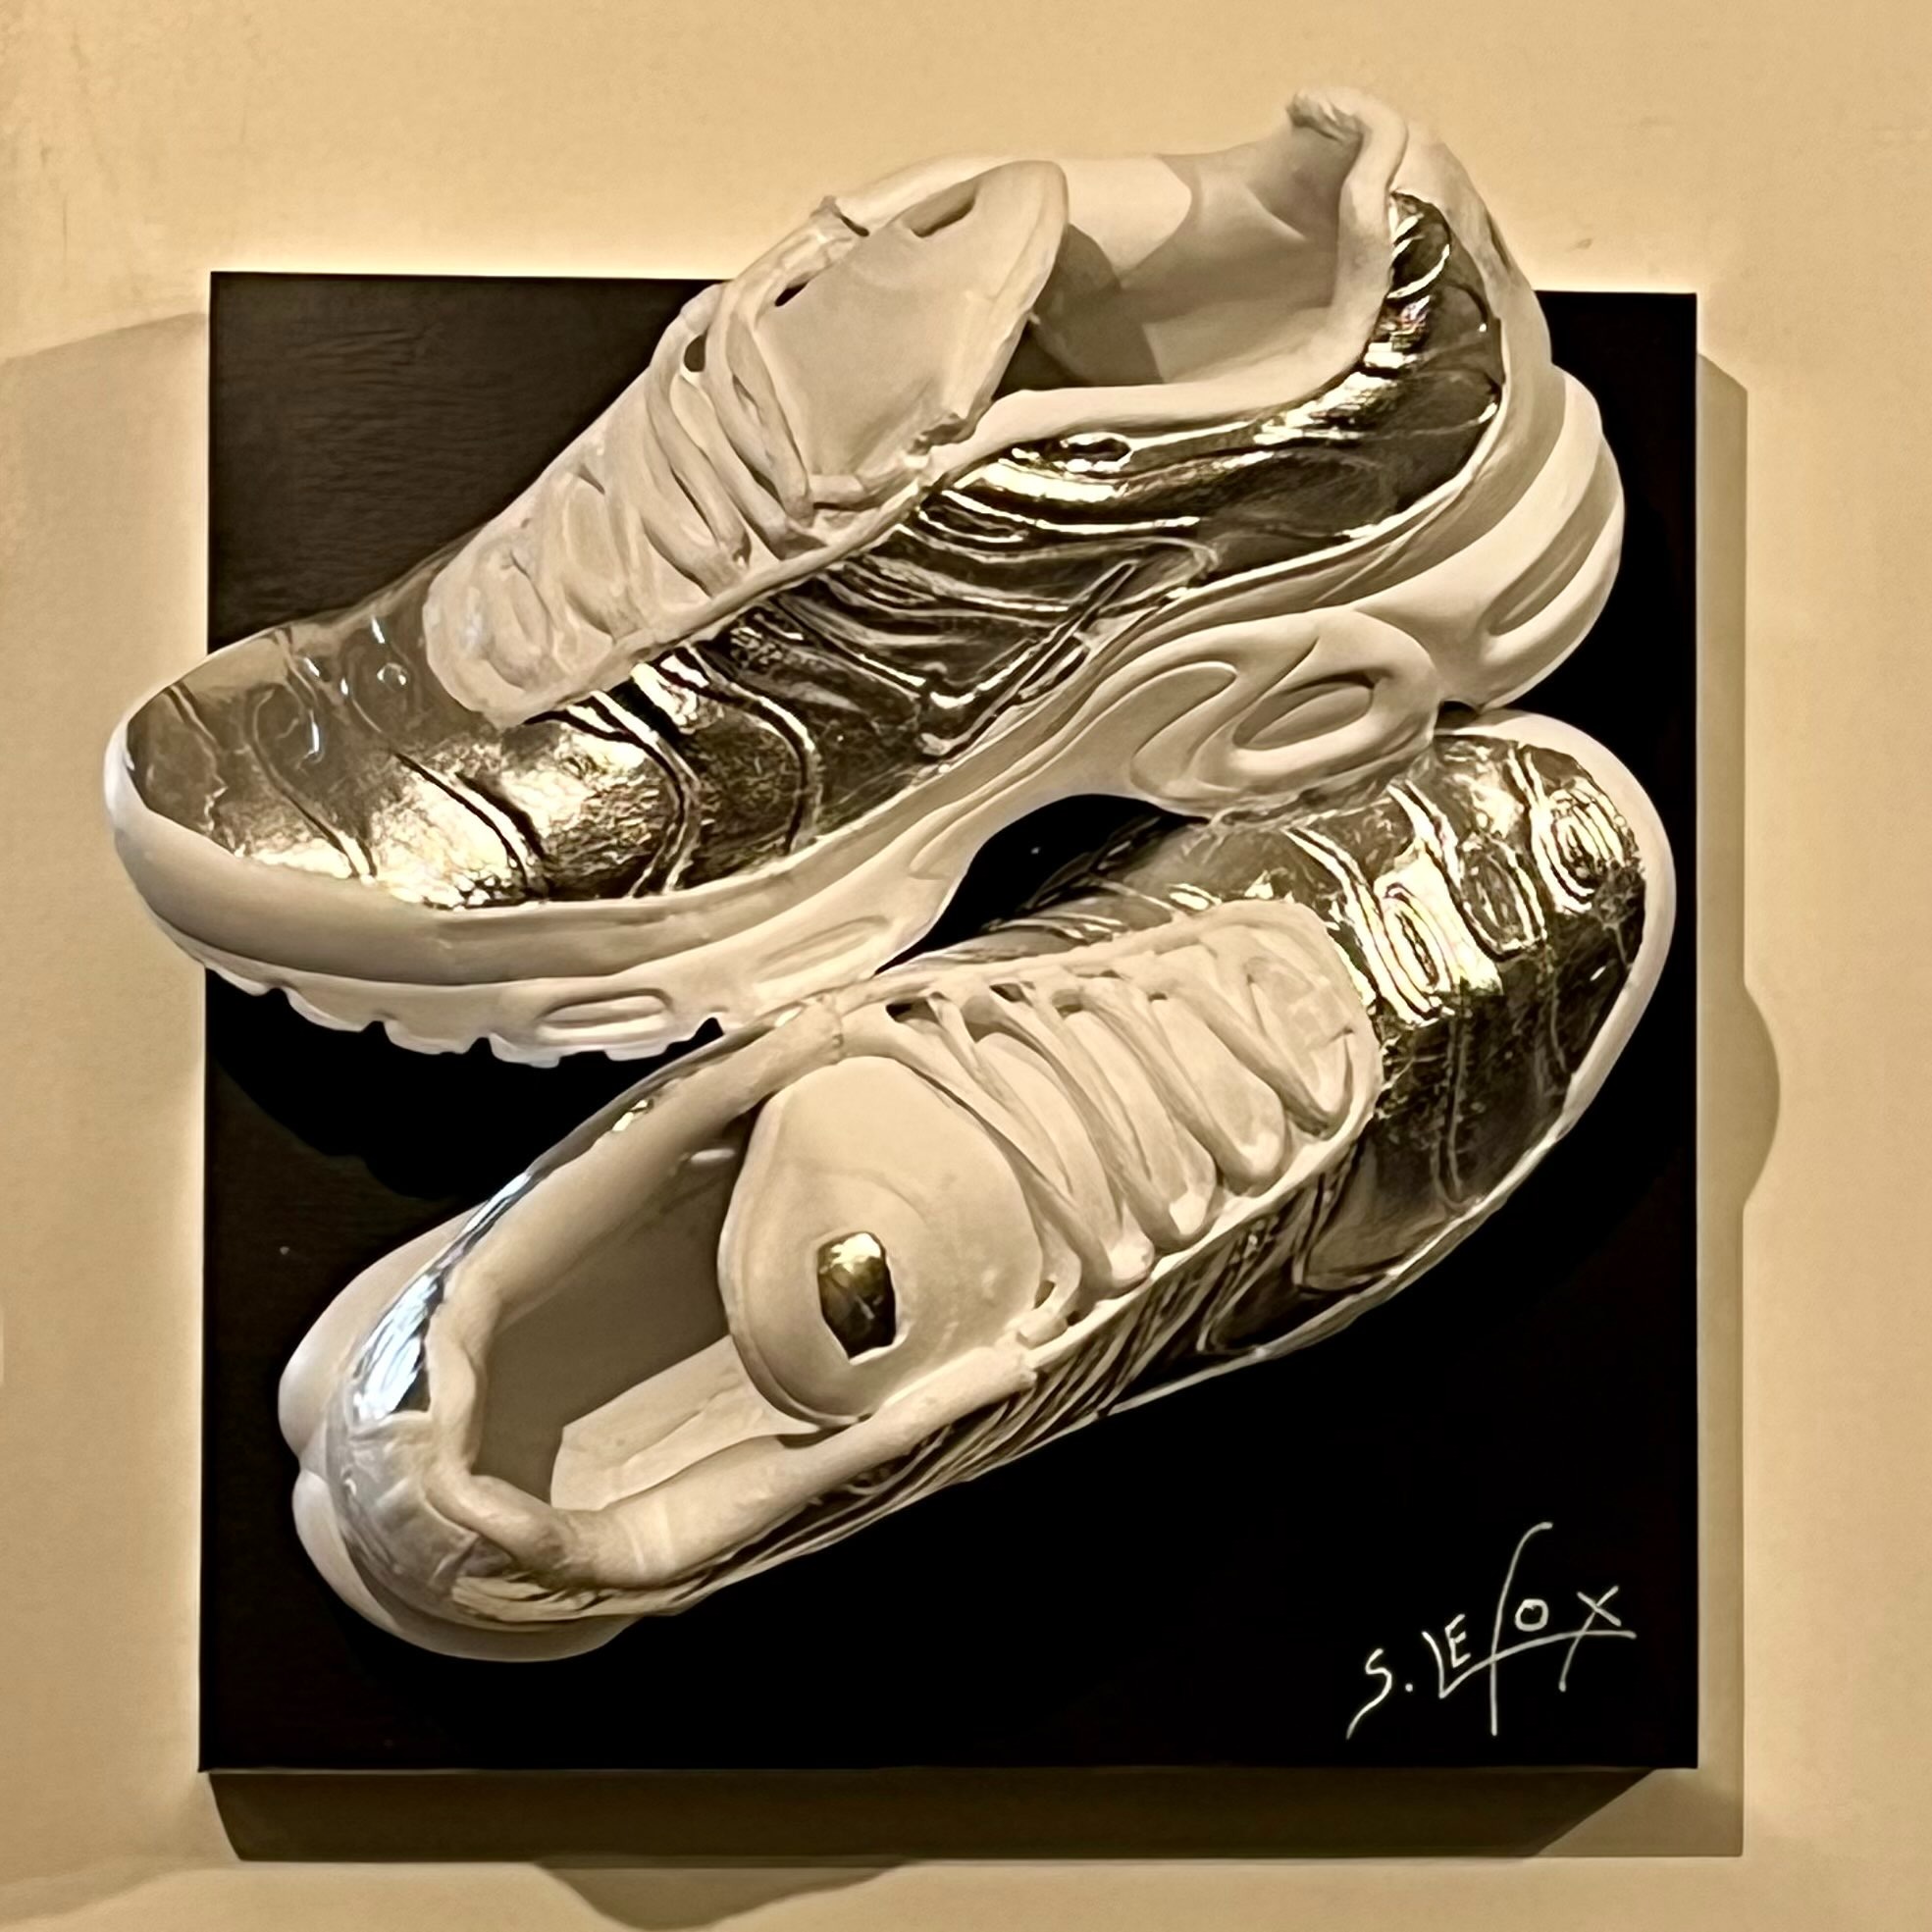 SILVER TUNED</br>Acrylic and silver leaf on Nike Air Max Tuned, wooden box 30 X 30 X 20 SBD